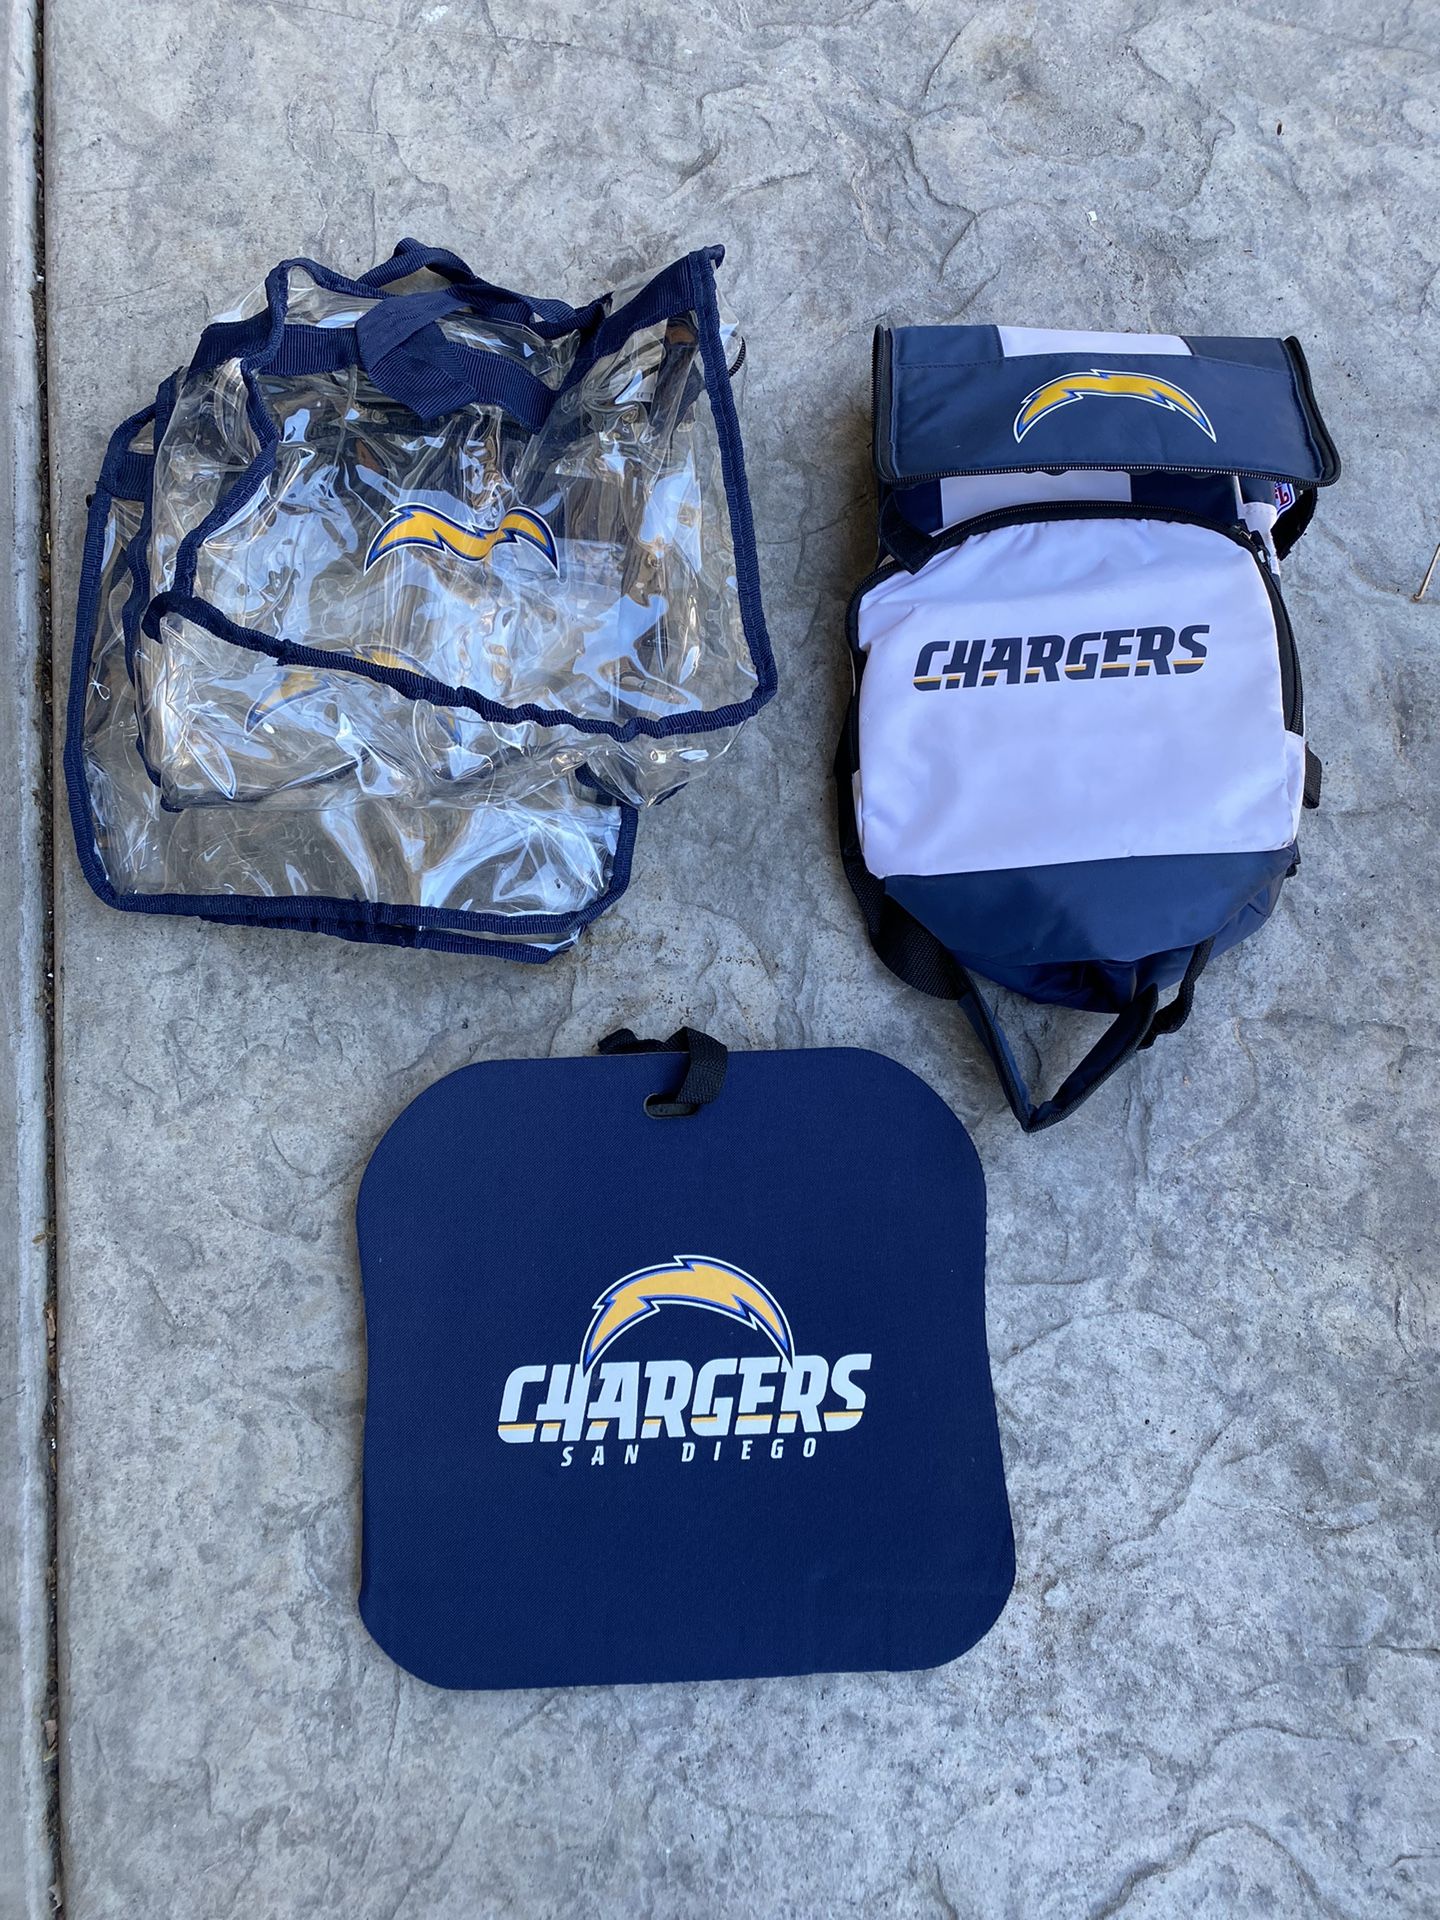 Chargers Foldable Cooler Bag, Seat Cushion, Clear Bag For Stadium